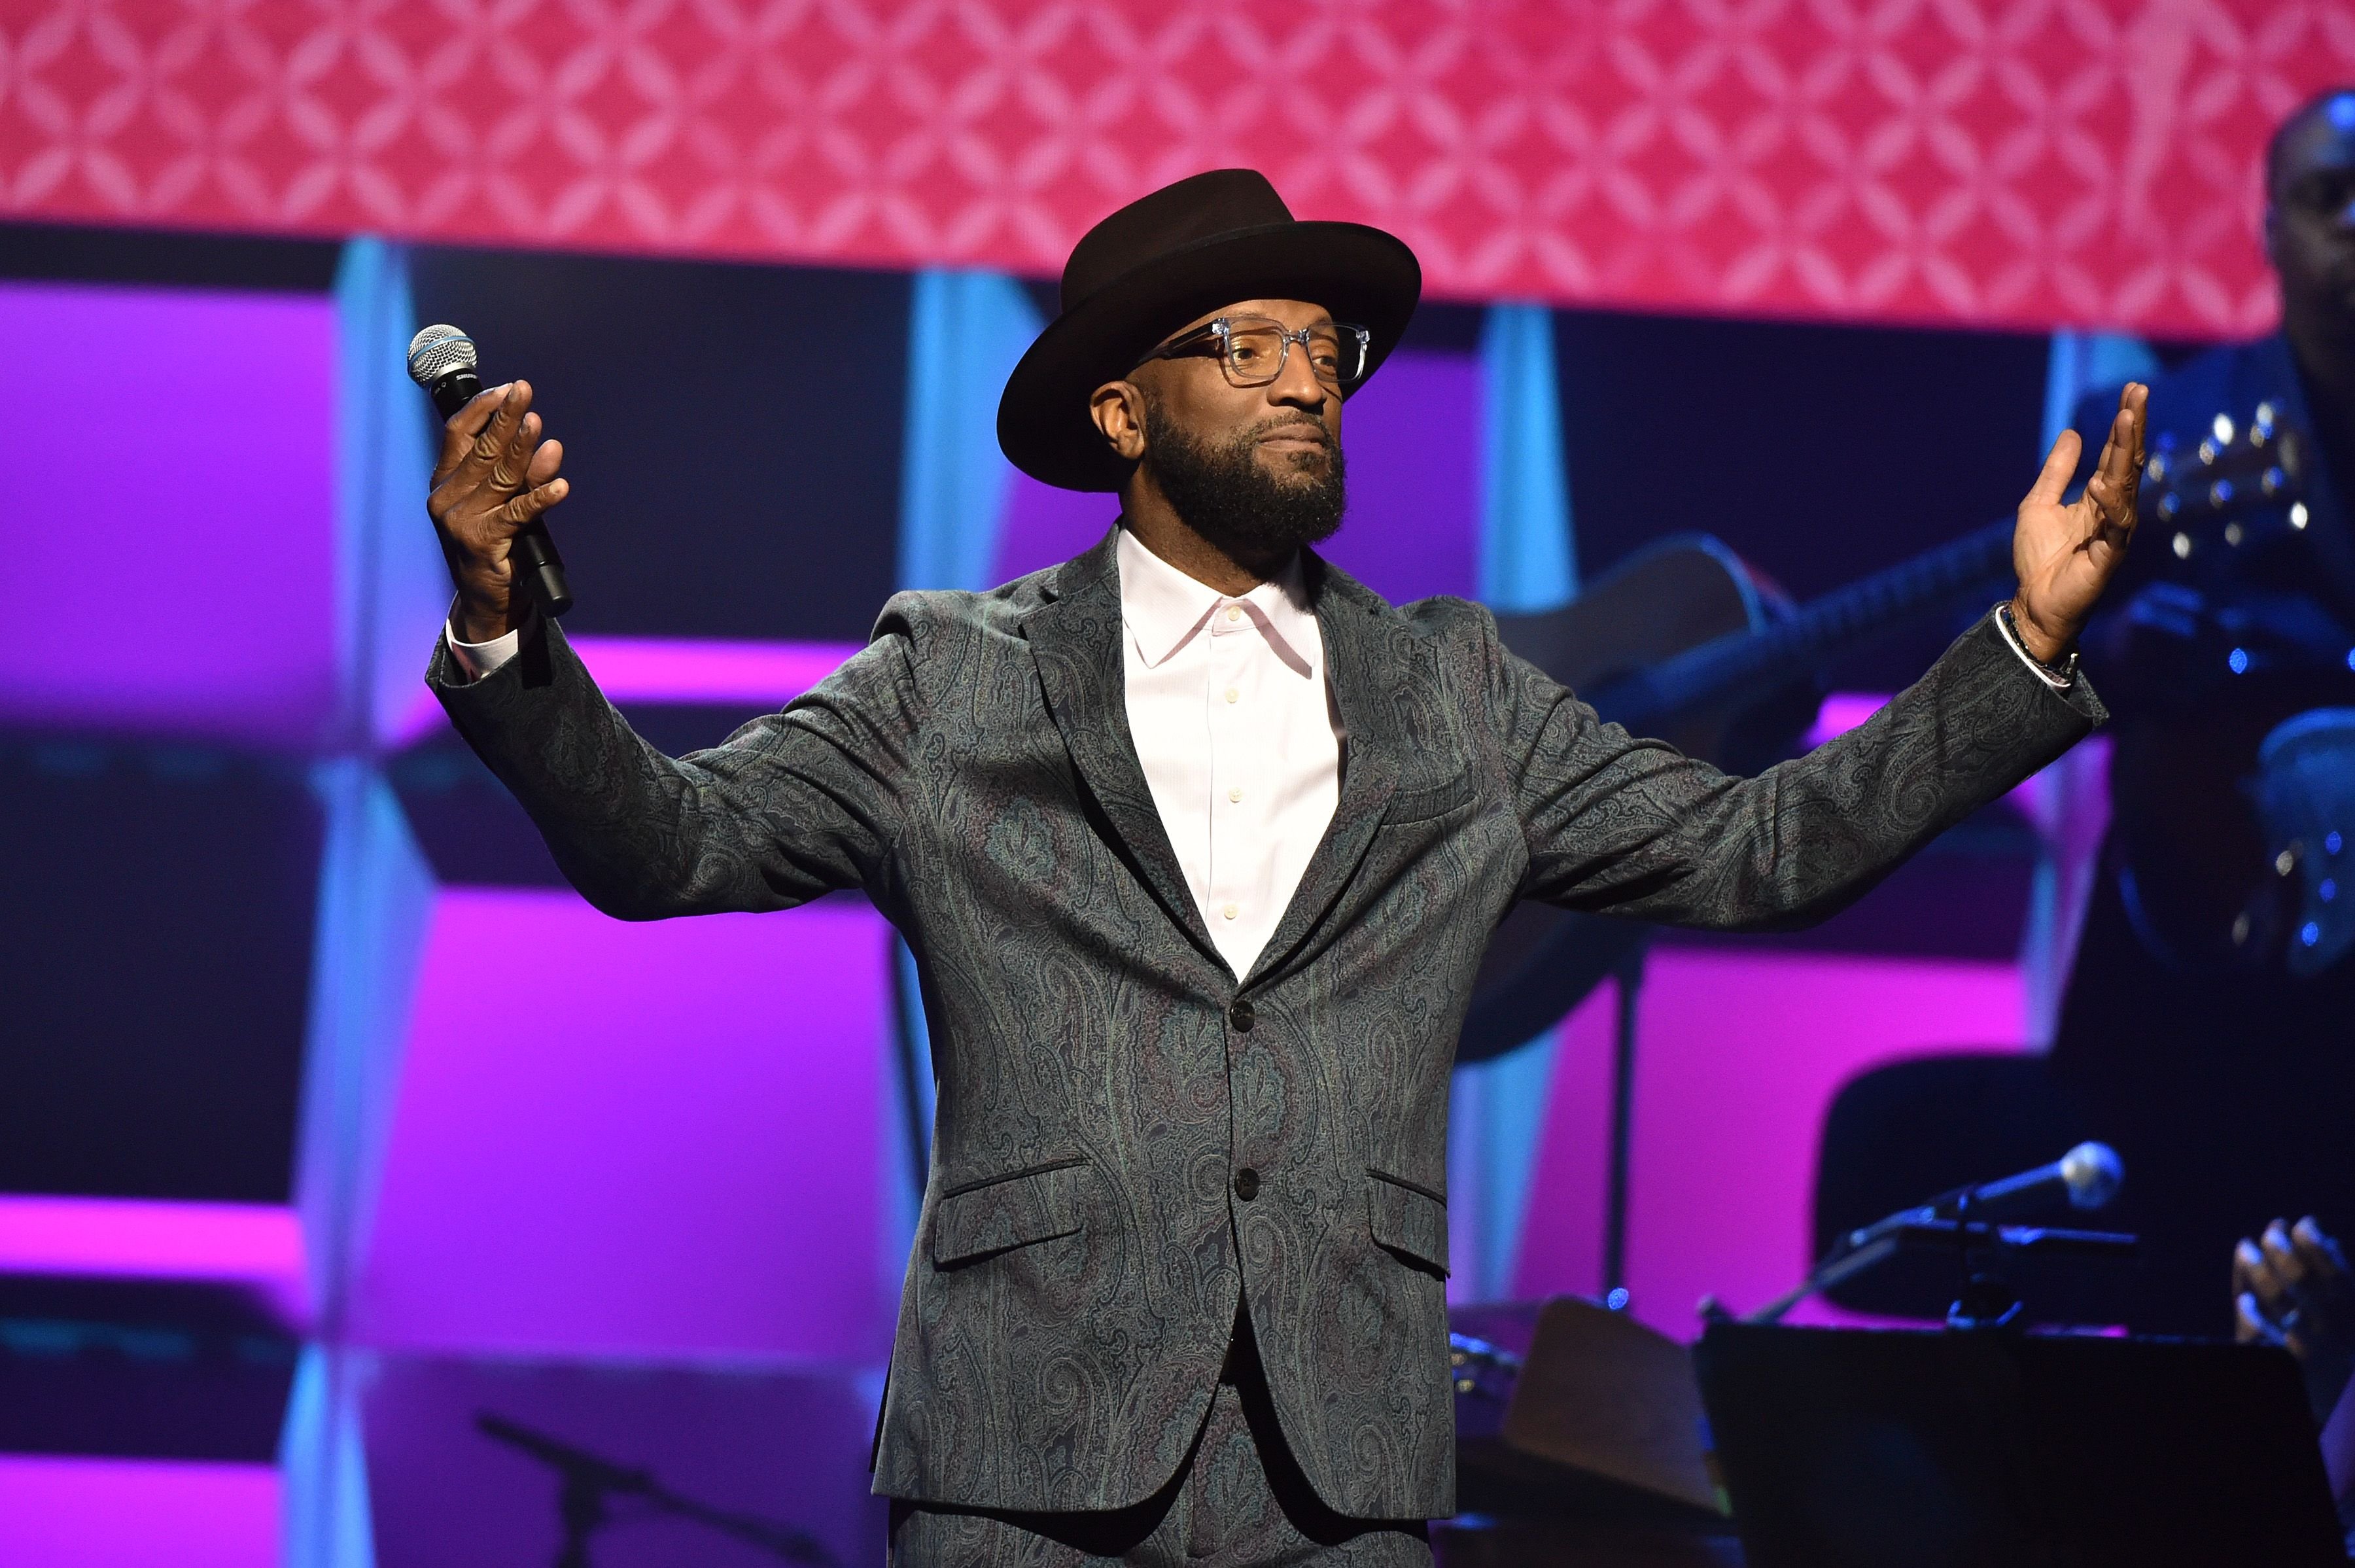 Rickey Smiley hosted the BET Super Bowl Gospel Celebration at the James L. Knight Center on January 30, 2020 in Miami, Florida | Photo: Getty Images